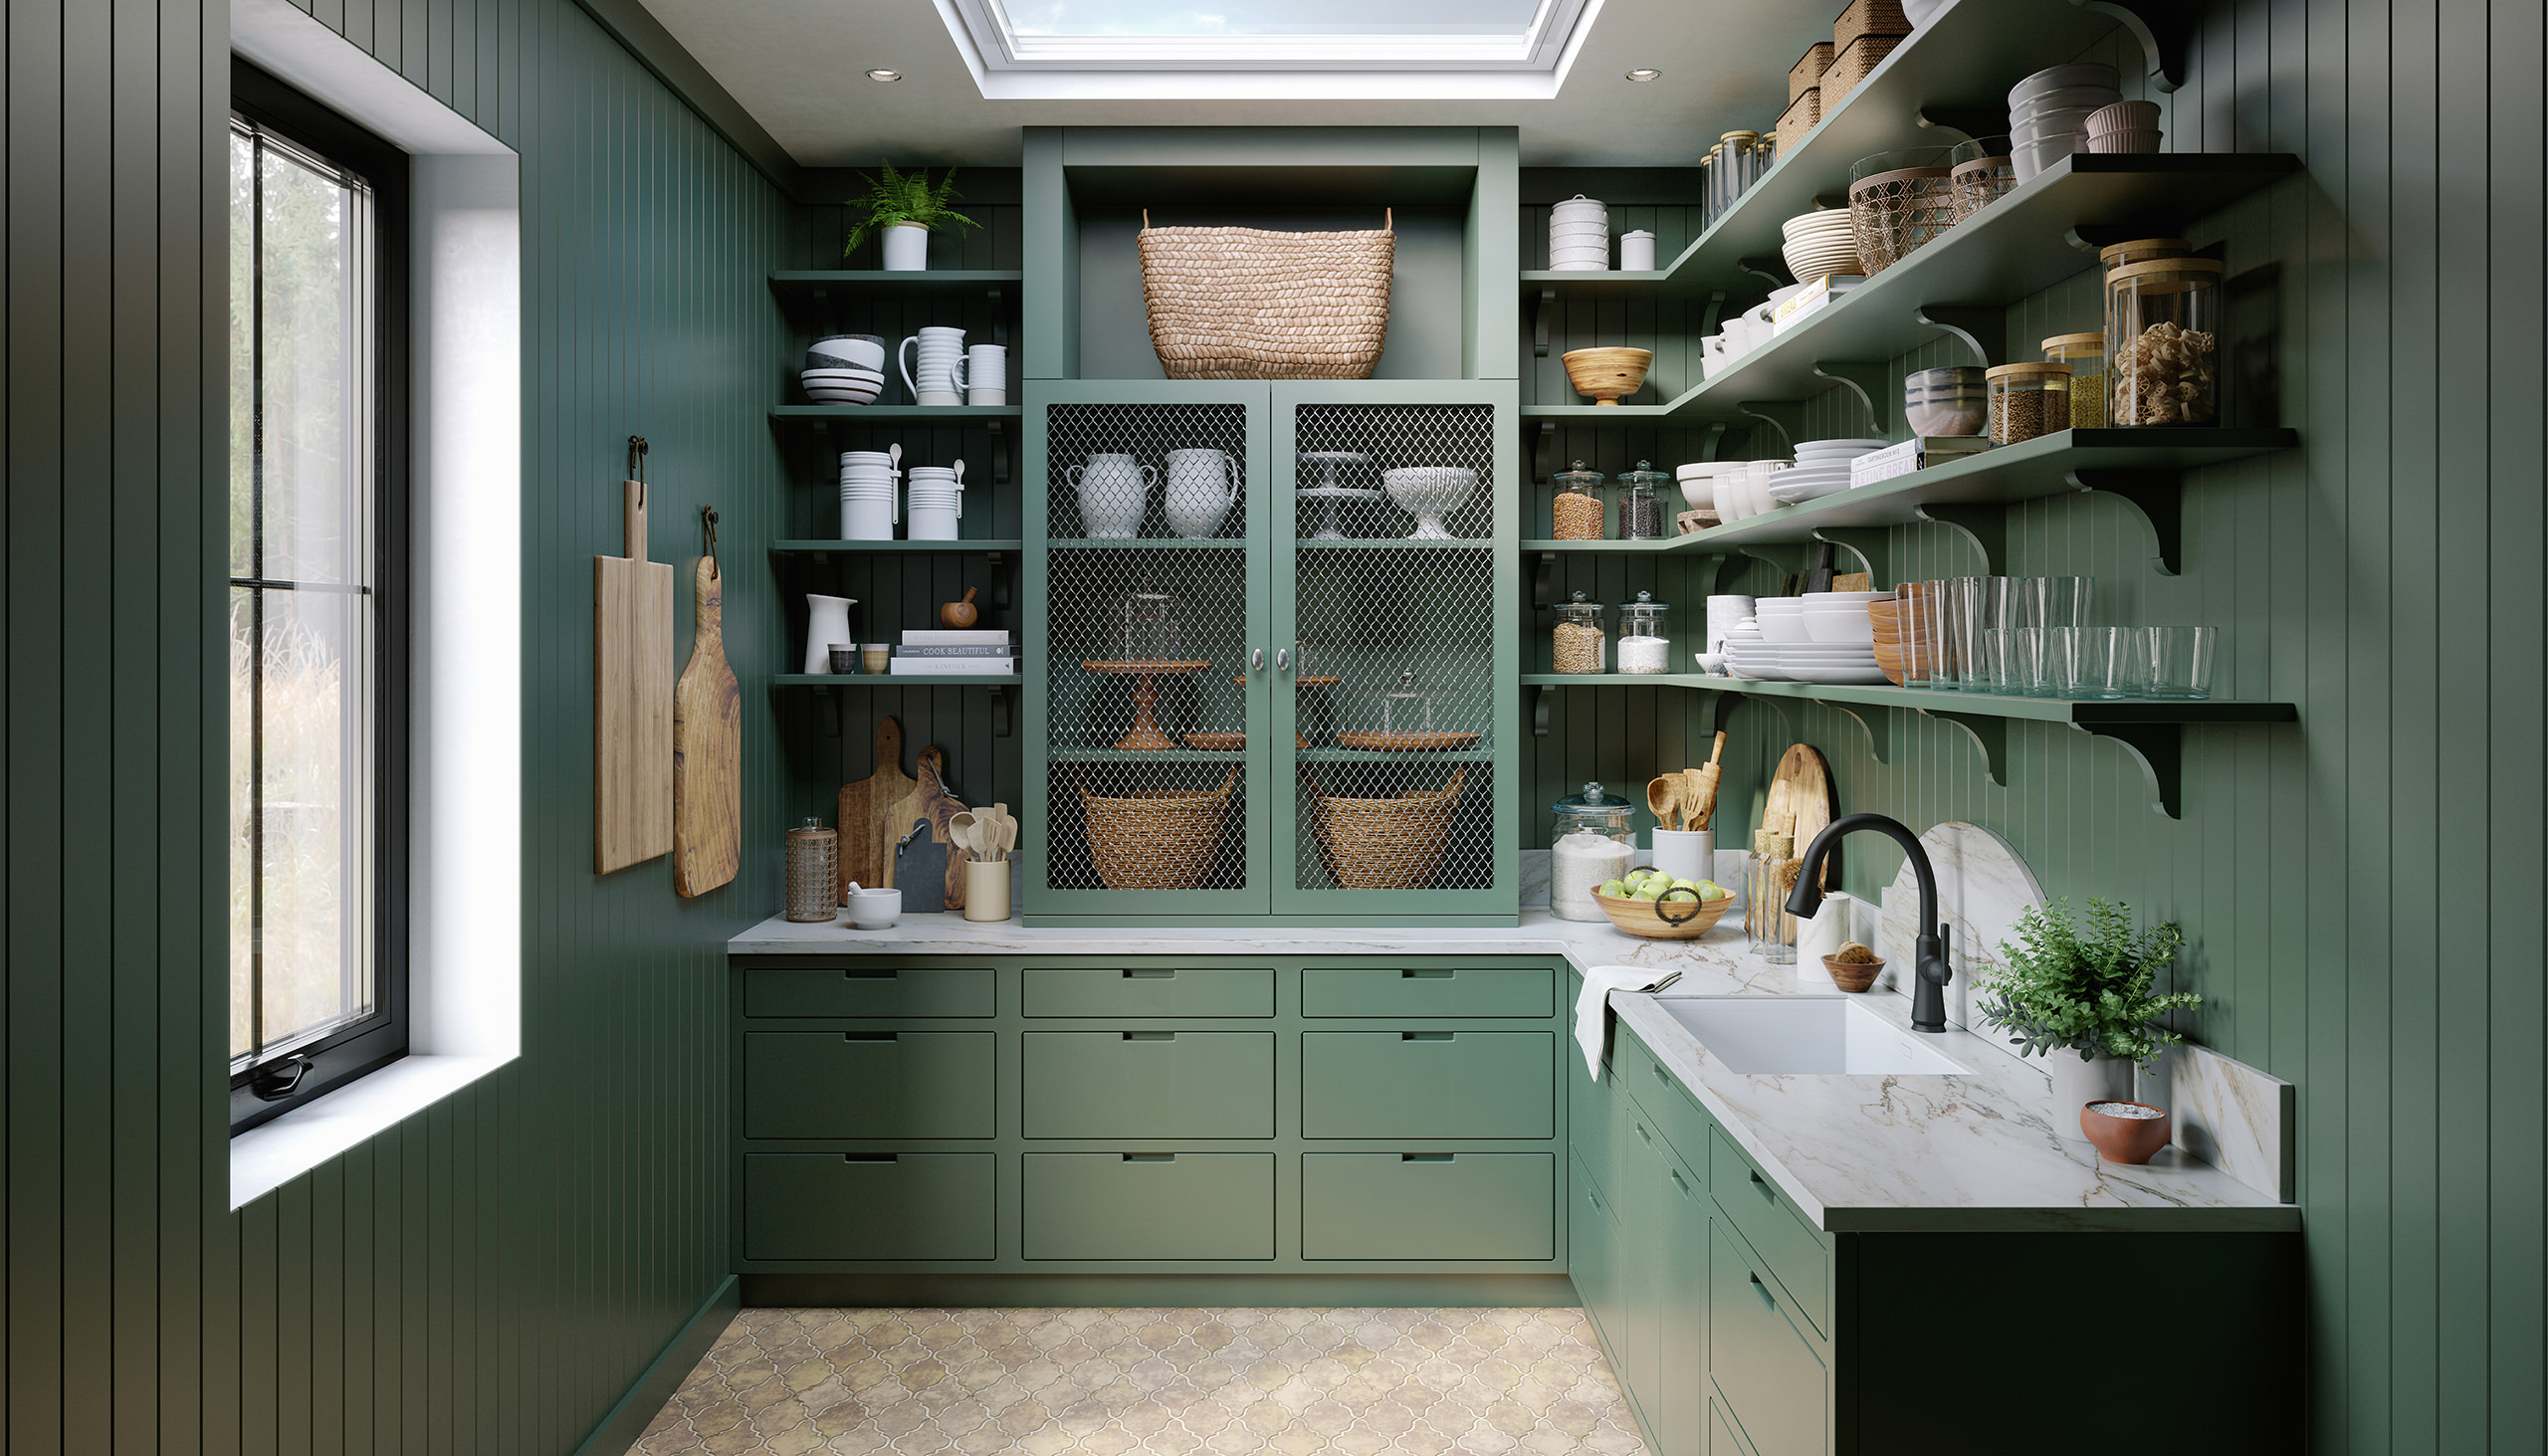 Front 3D view of a traditional kitchen with dark green millwork, black faucet and marble sink and worktop